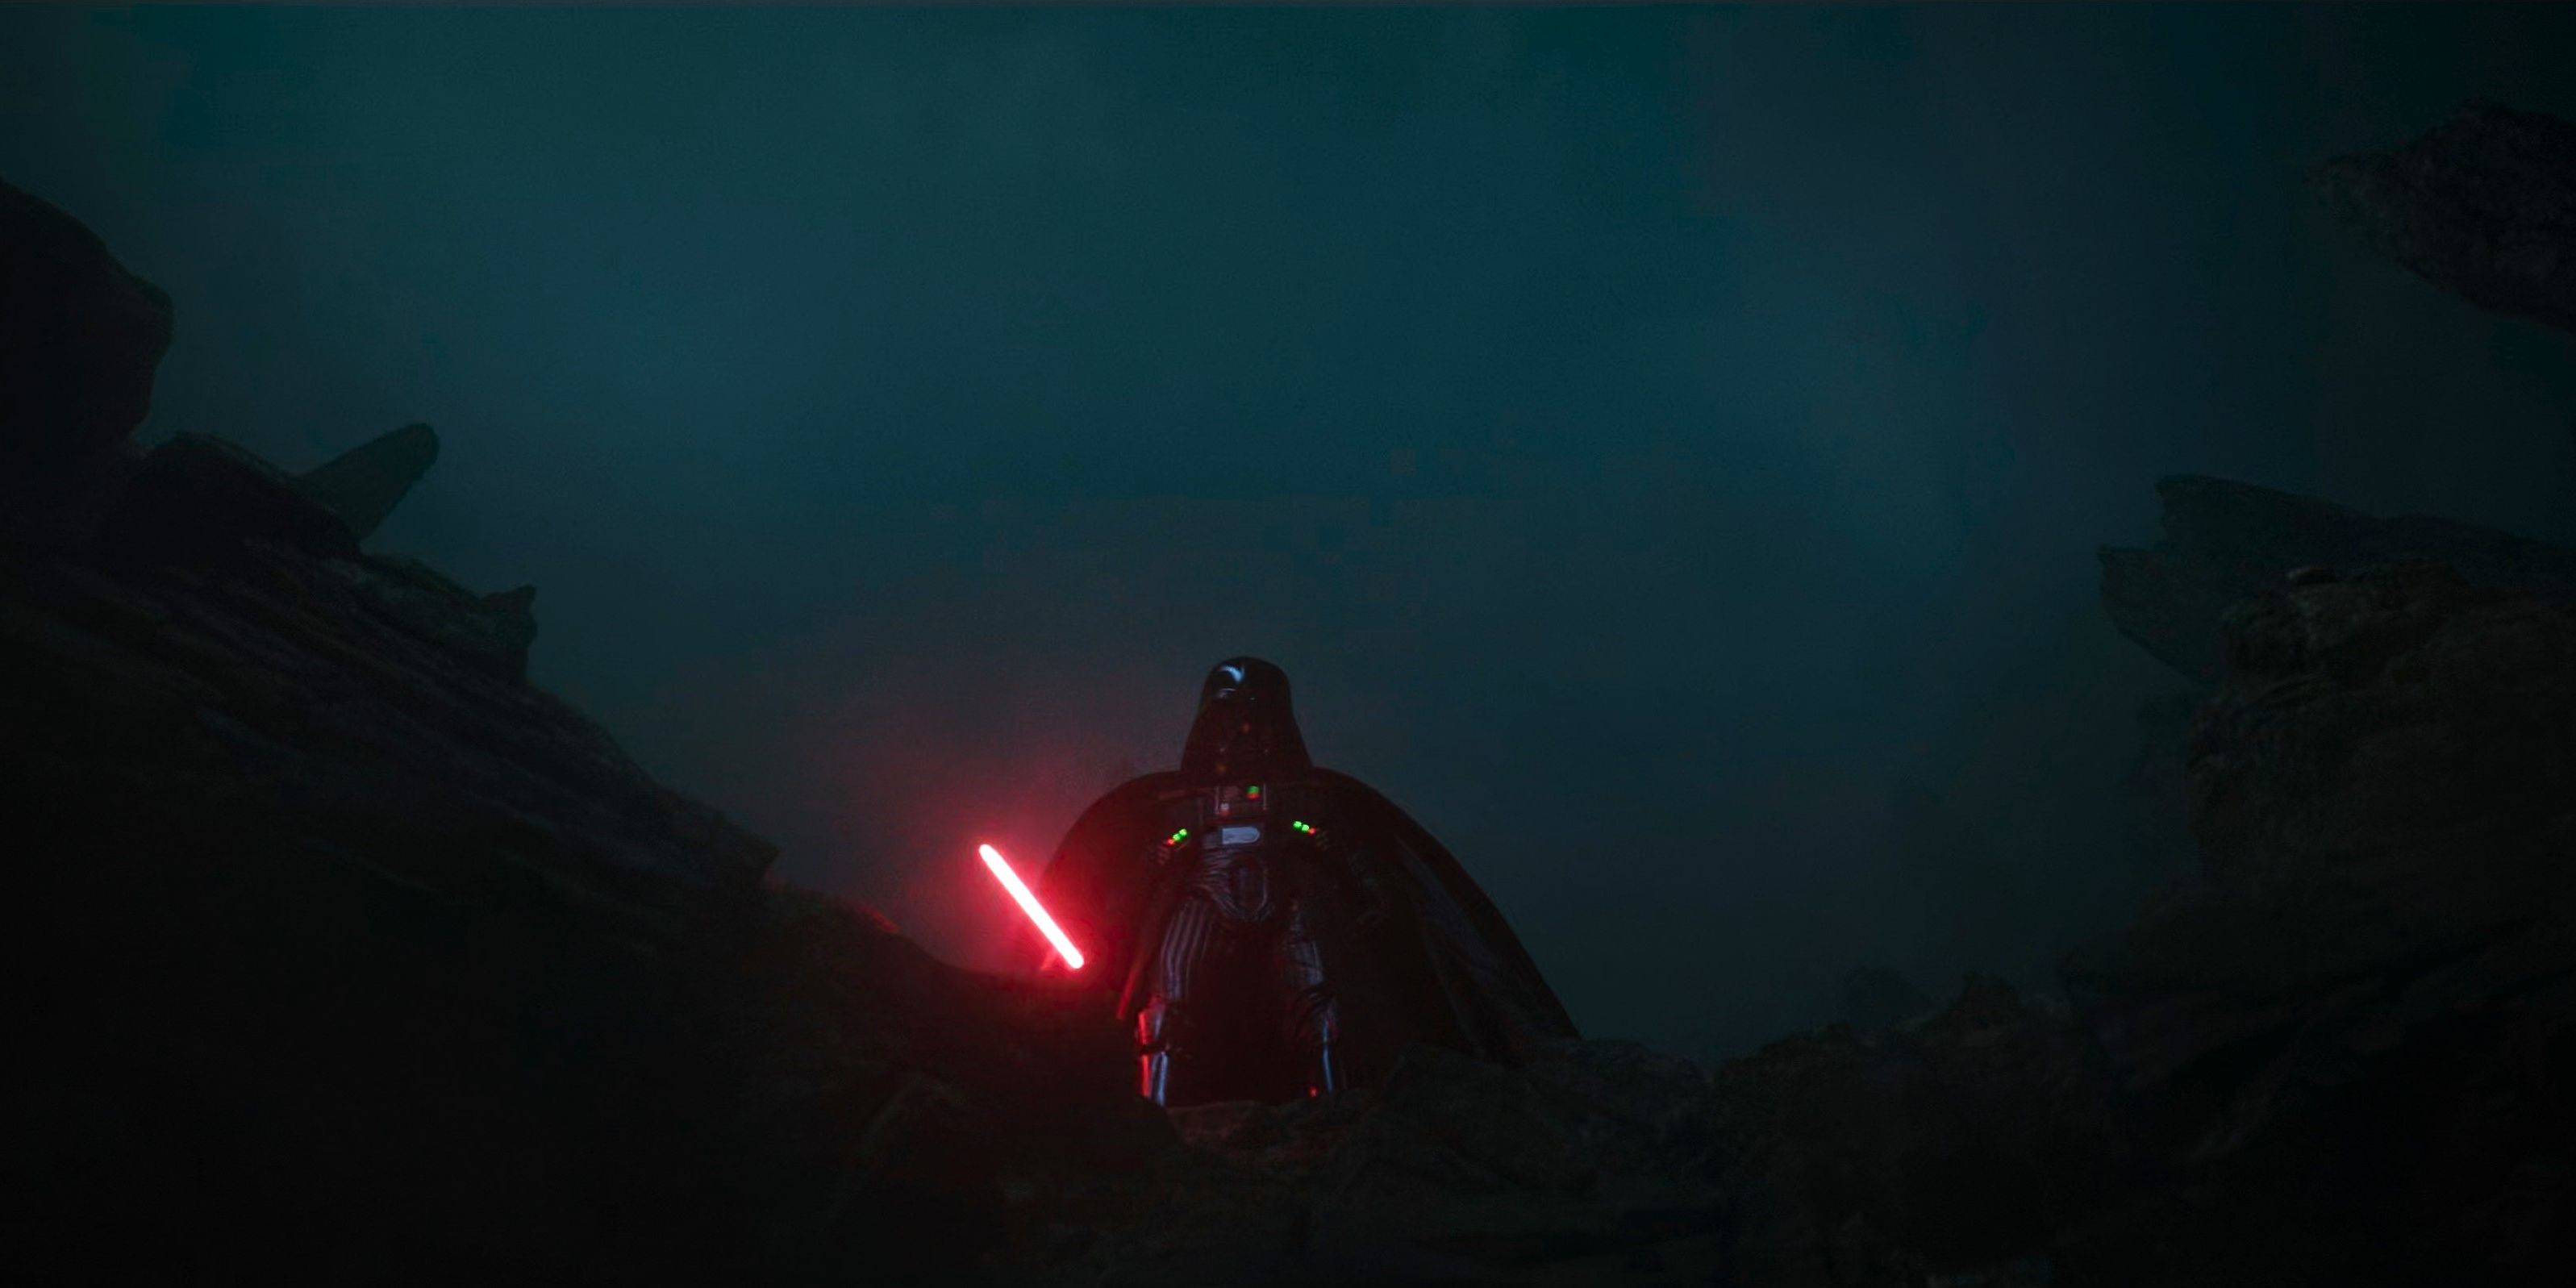 darth vader with the high ground